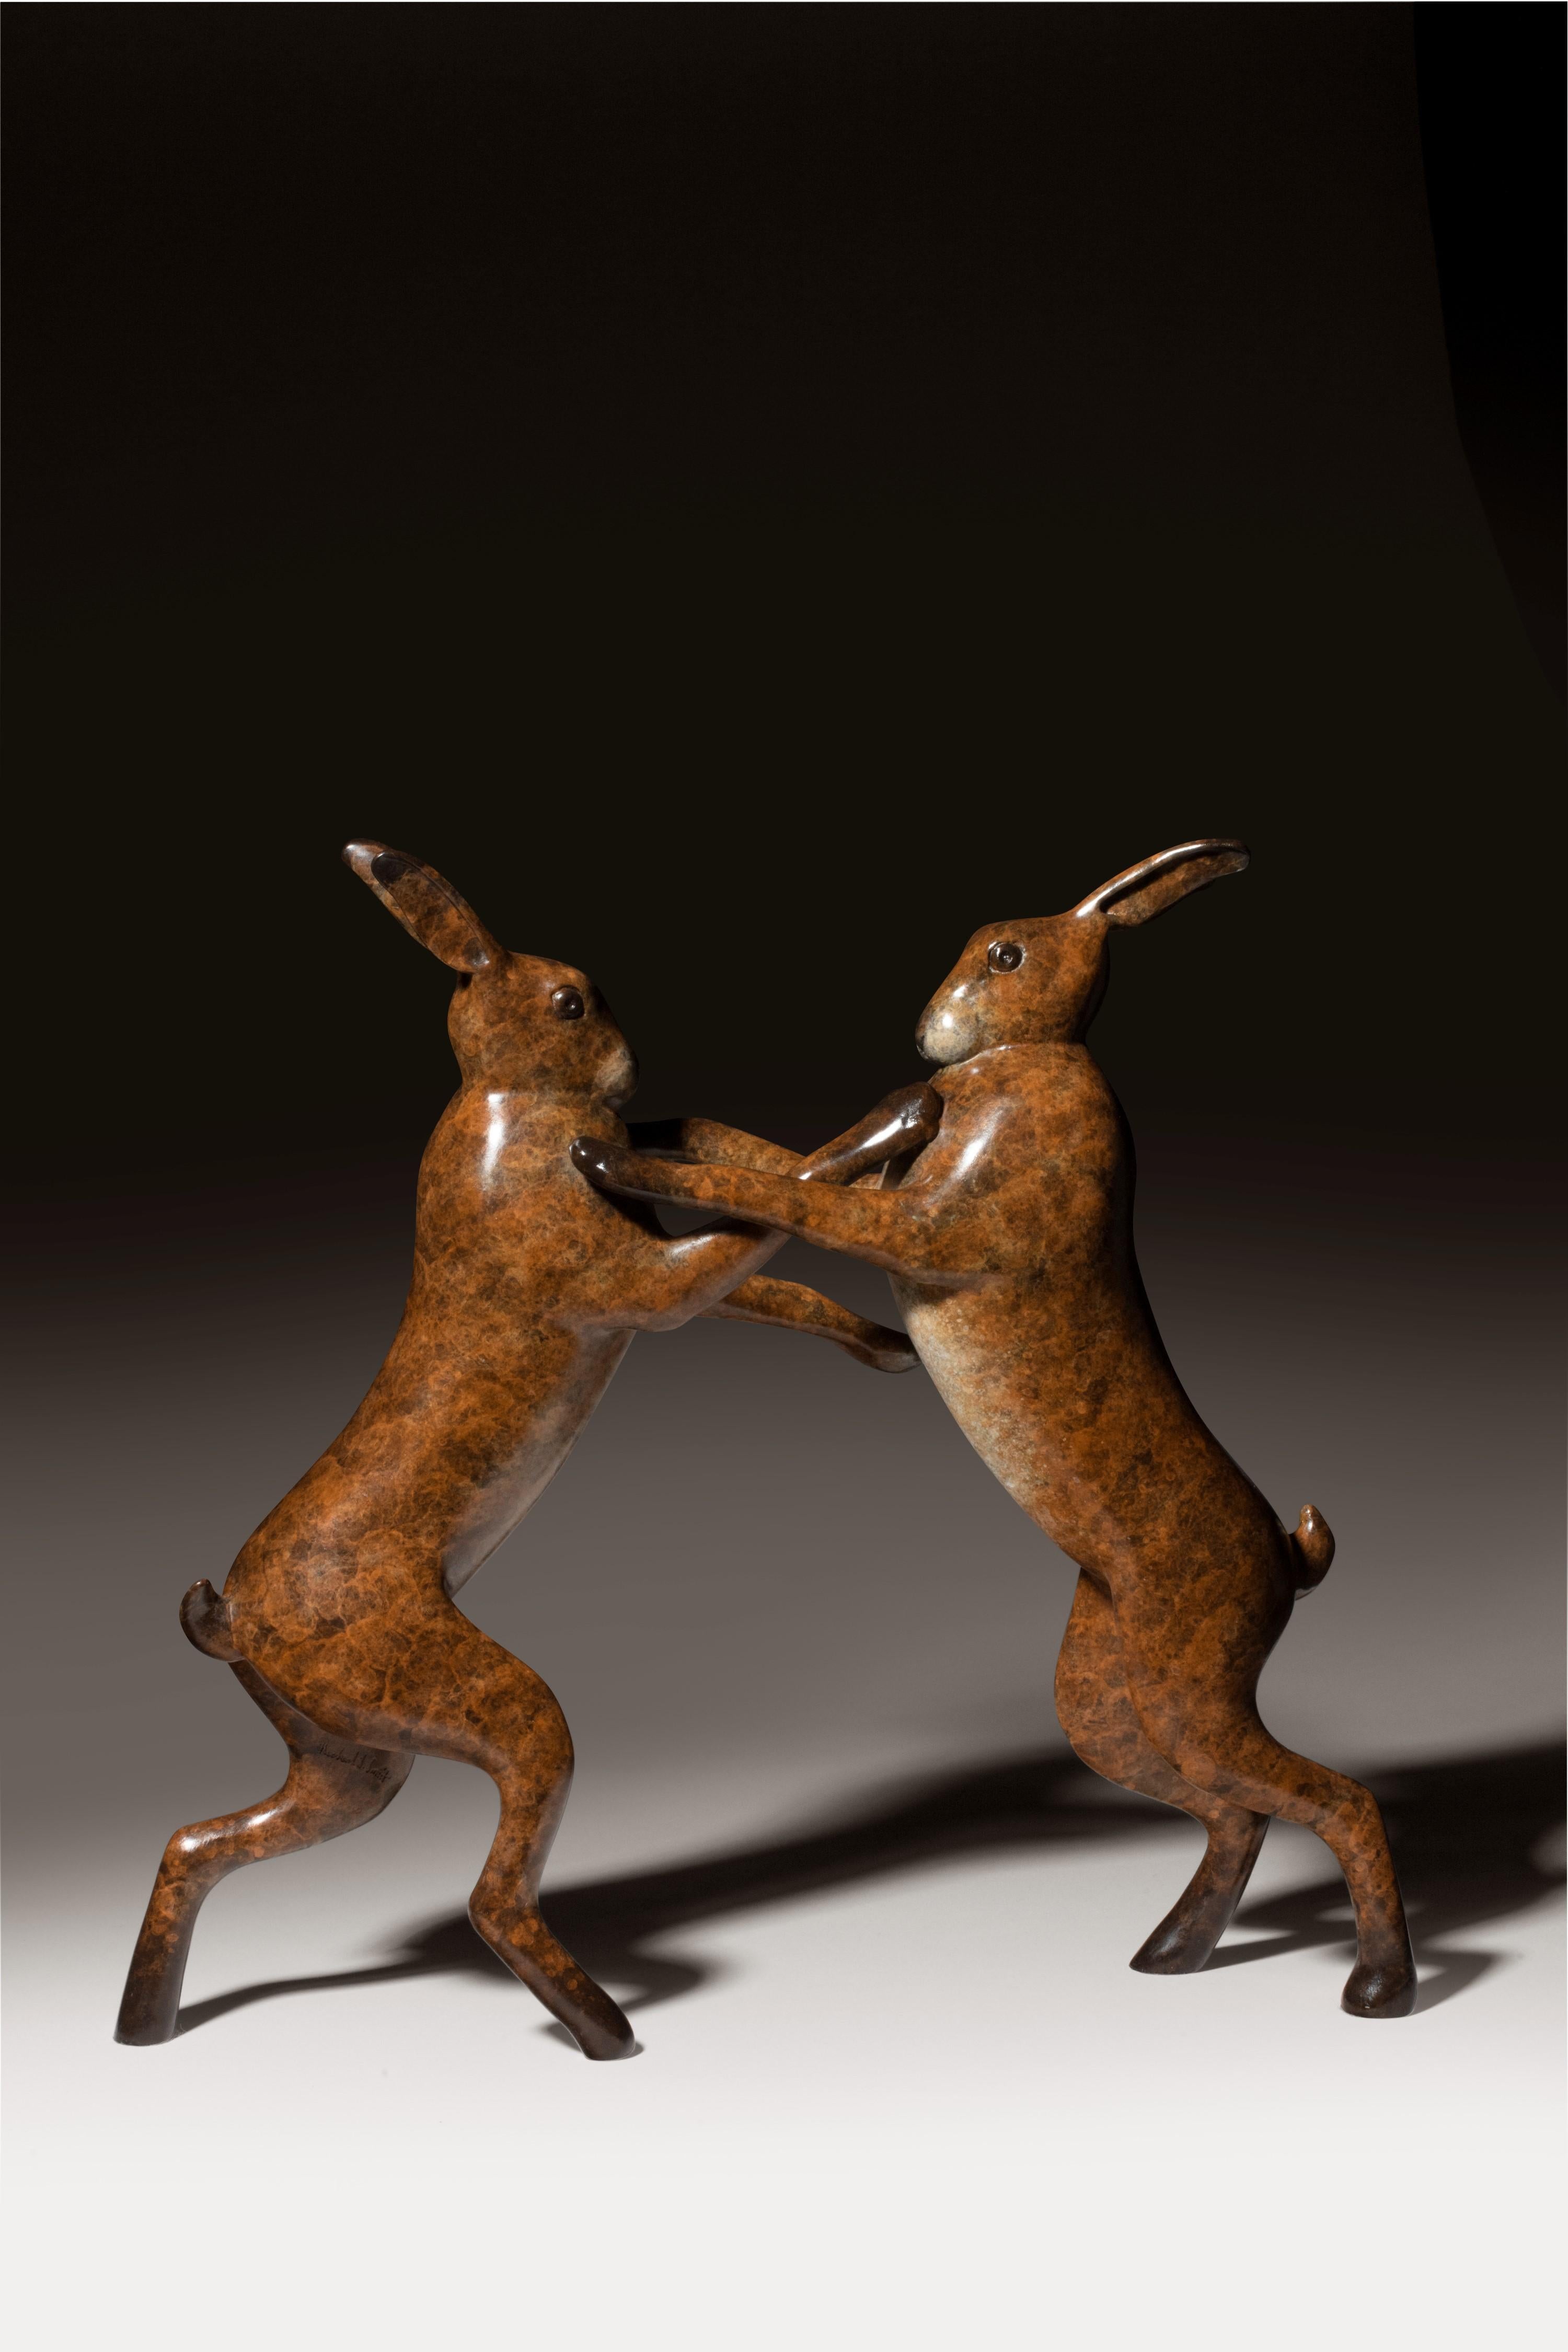 'Boxing Hares' Contemporary Bronze sculpture, brown Hares Wildlife & Nature  - Sculpture by Richard Smith b.1955